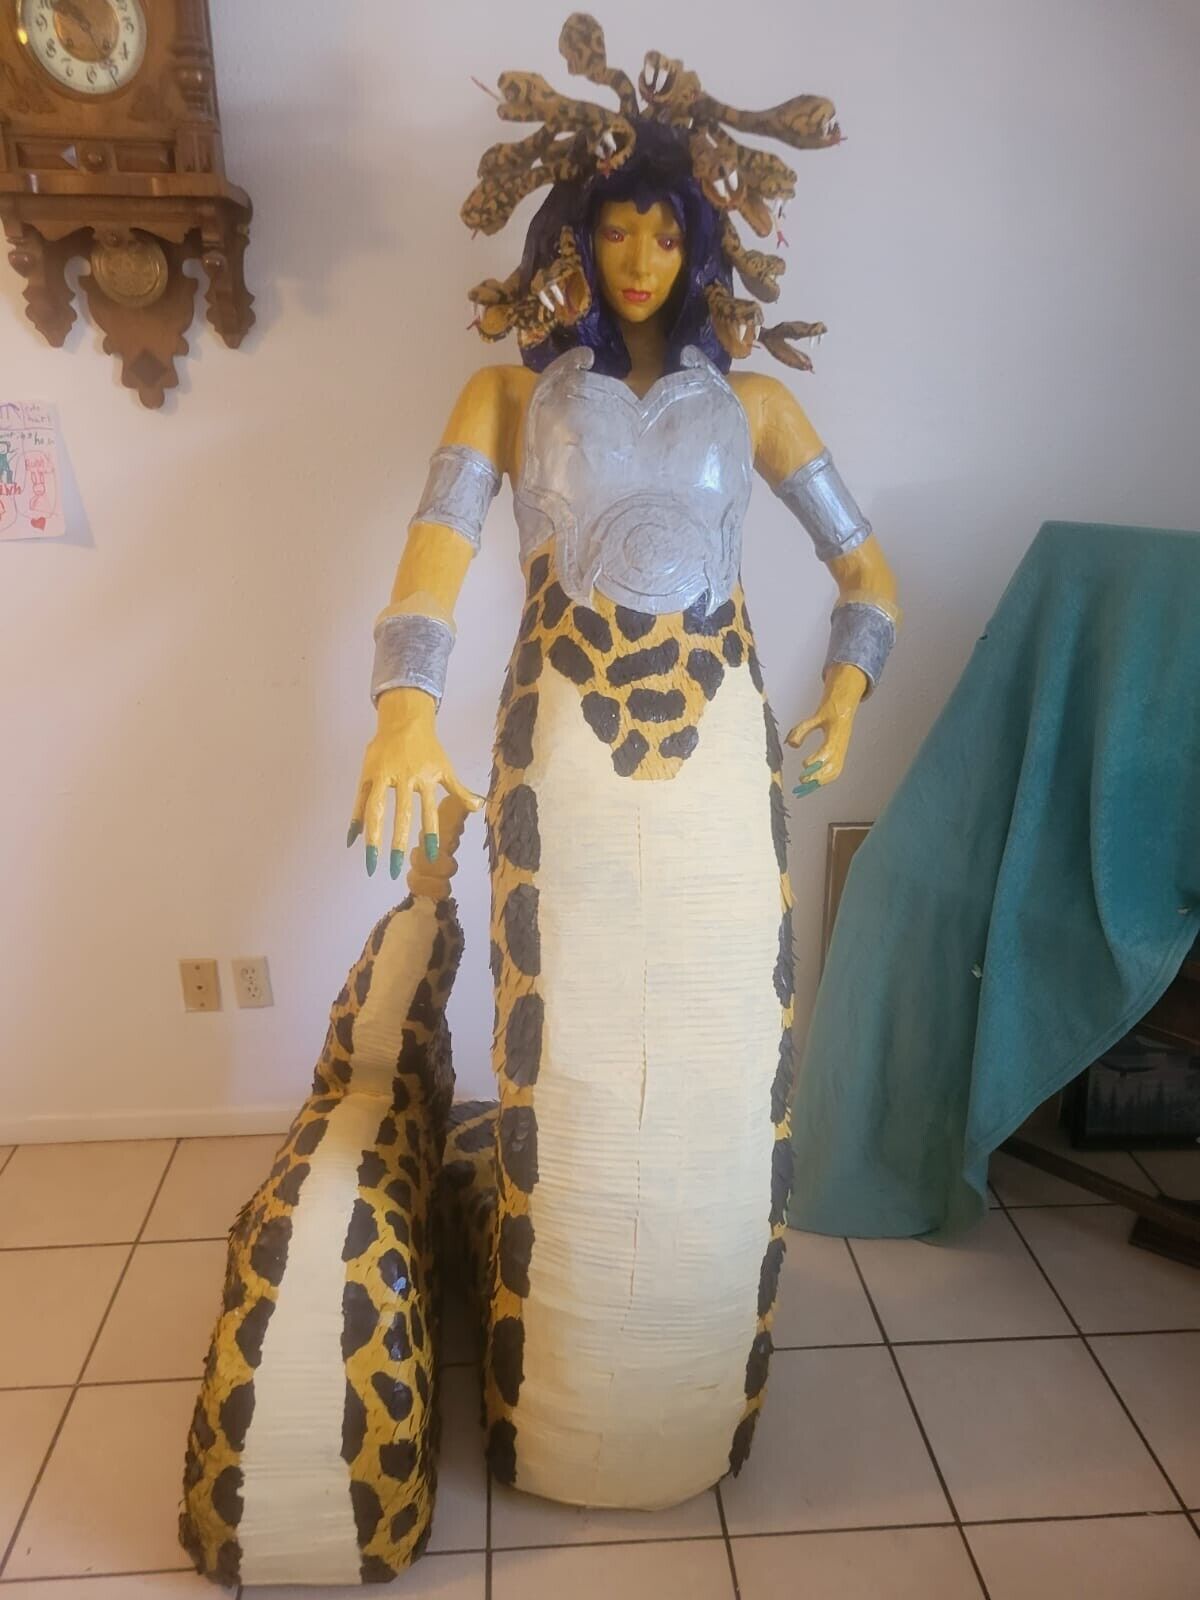 Paper Mache Medusa Art. Uniquely made, One of a Kind. 6.5 ft tall.